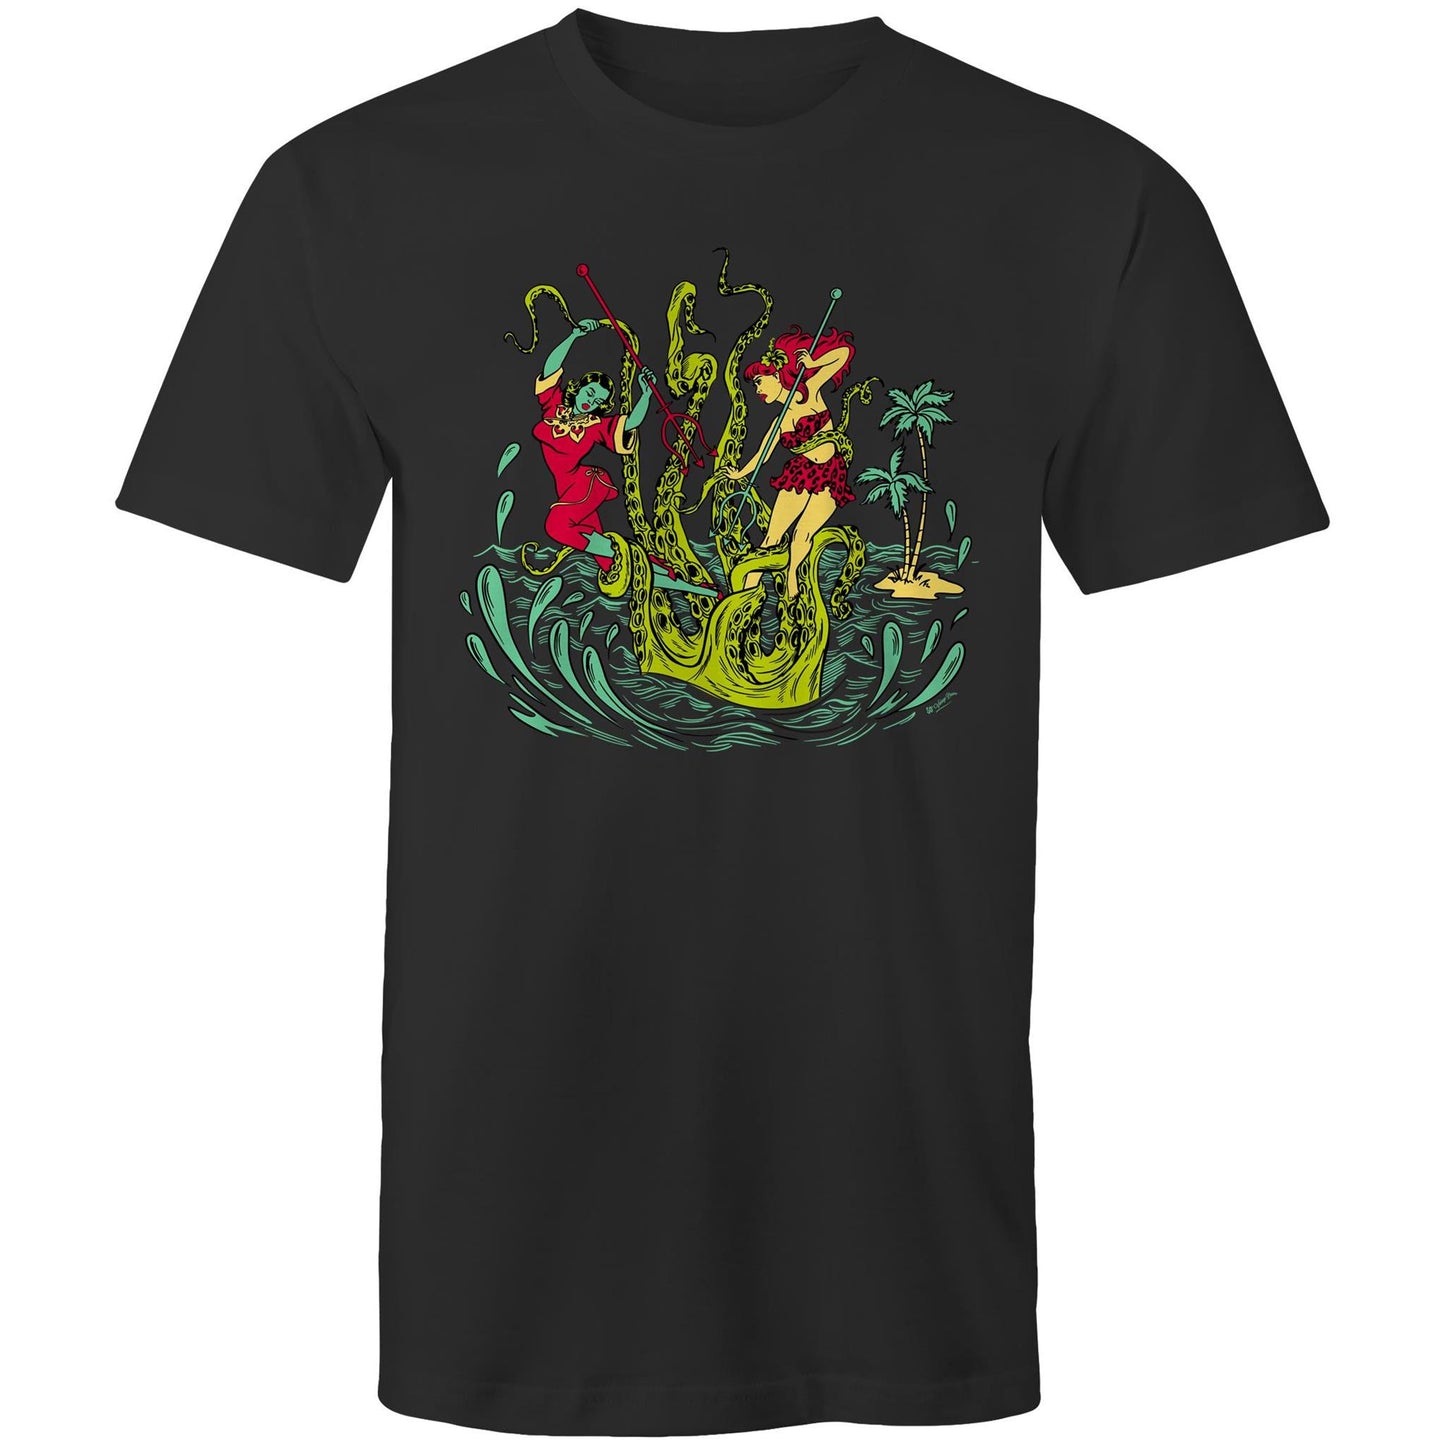 Unisex black tee shirt with a graphic of two women battling a giant Kracken